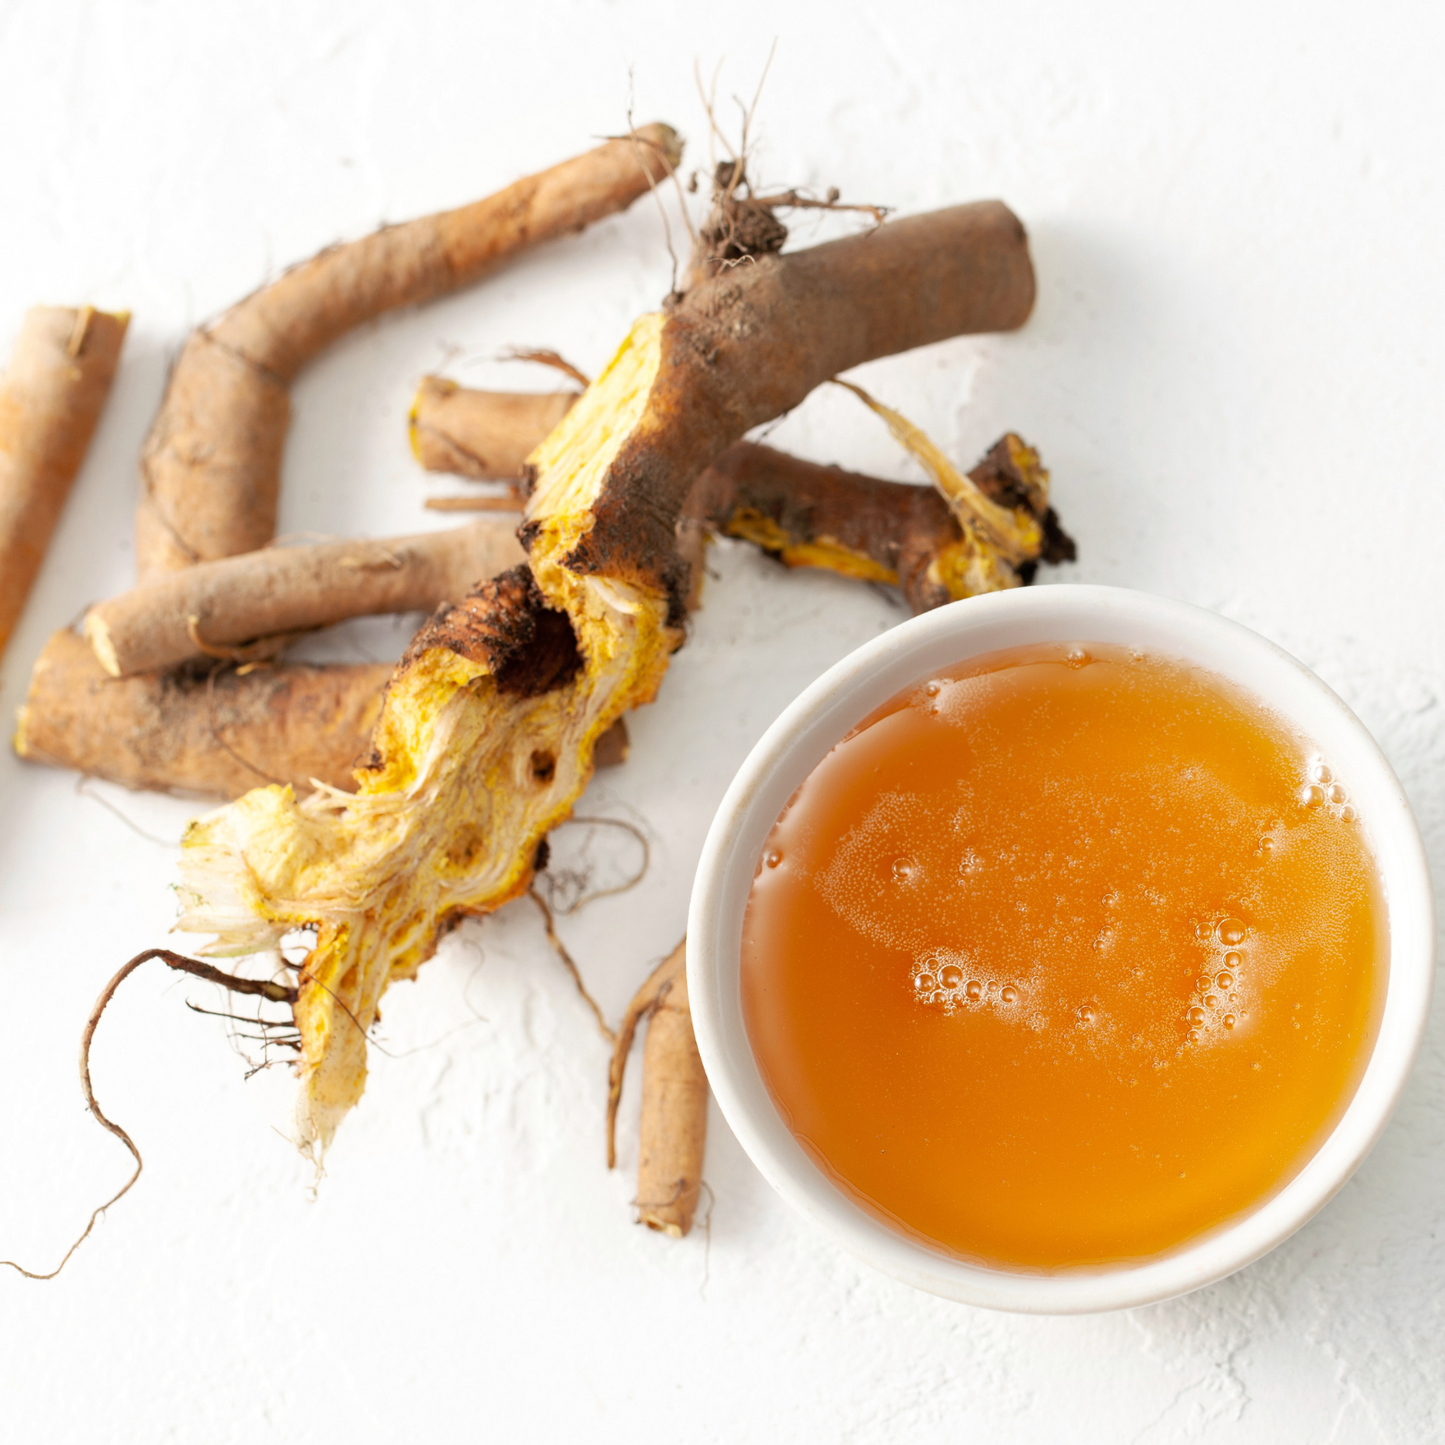 Yellow Dock Root For Blood Purification, Smudging For Ritual to Release Past Traumas